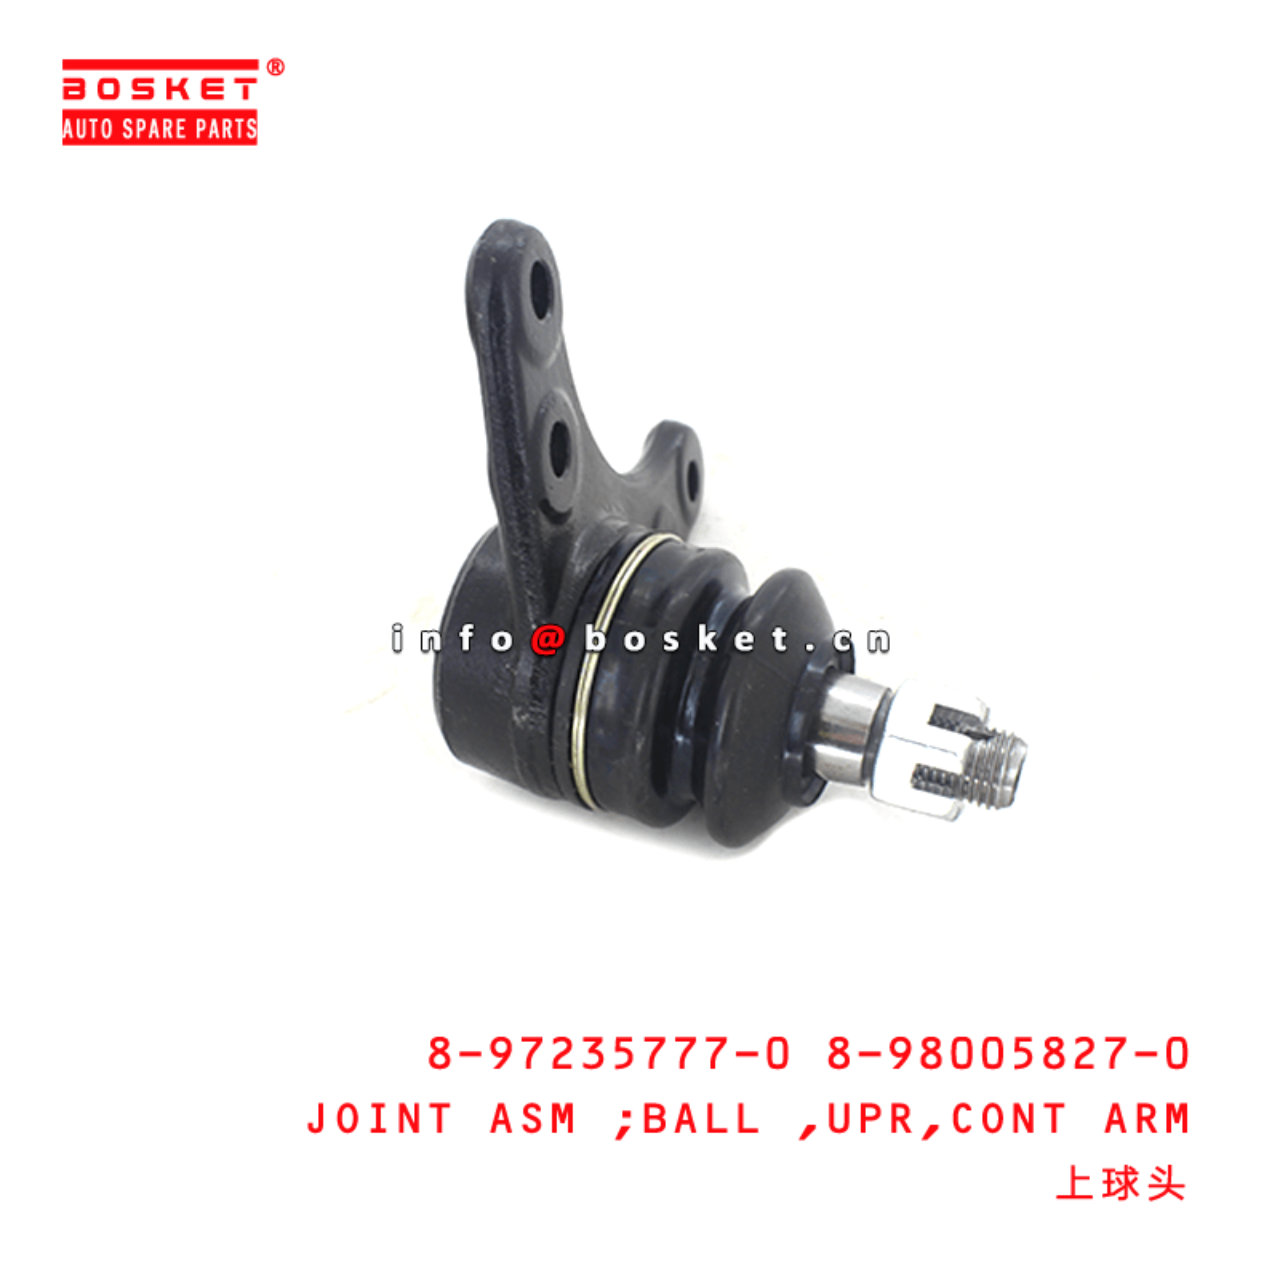 8-97235777-0 8-98005827-0 Control Arm Upper Ball Joint Assembly 8972357770 8980058270 Suitable for I